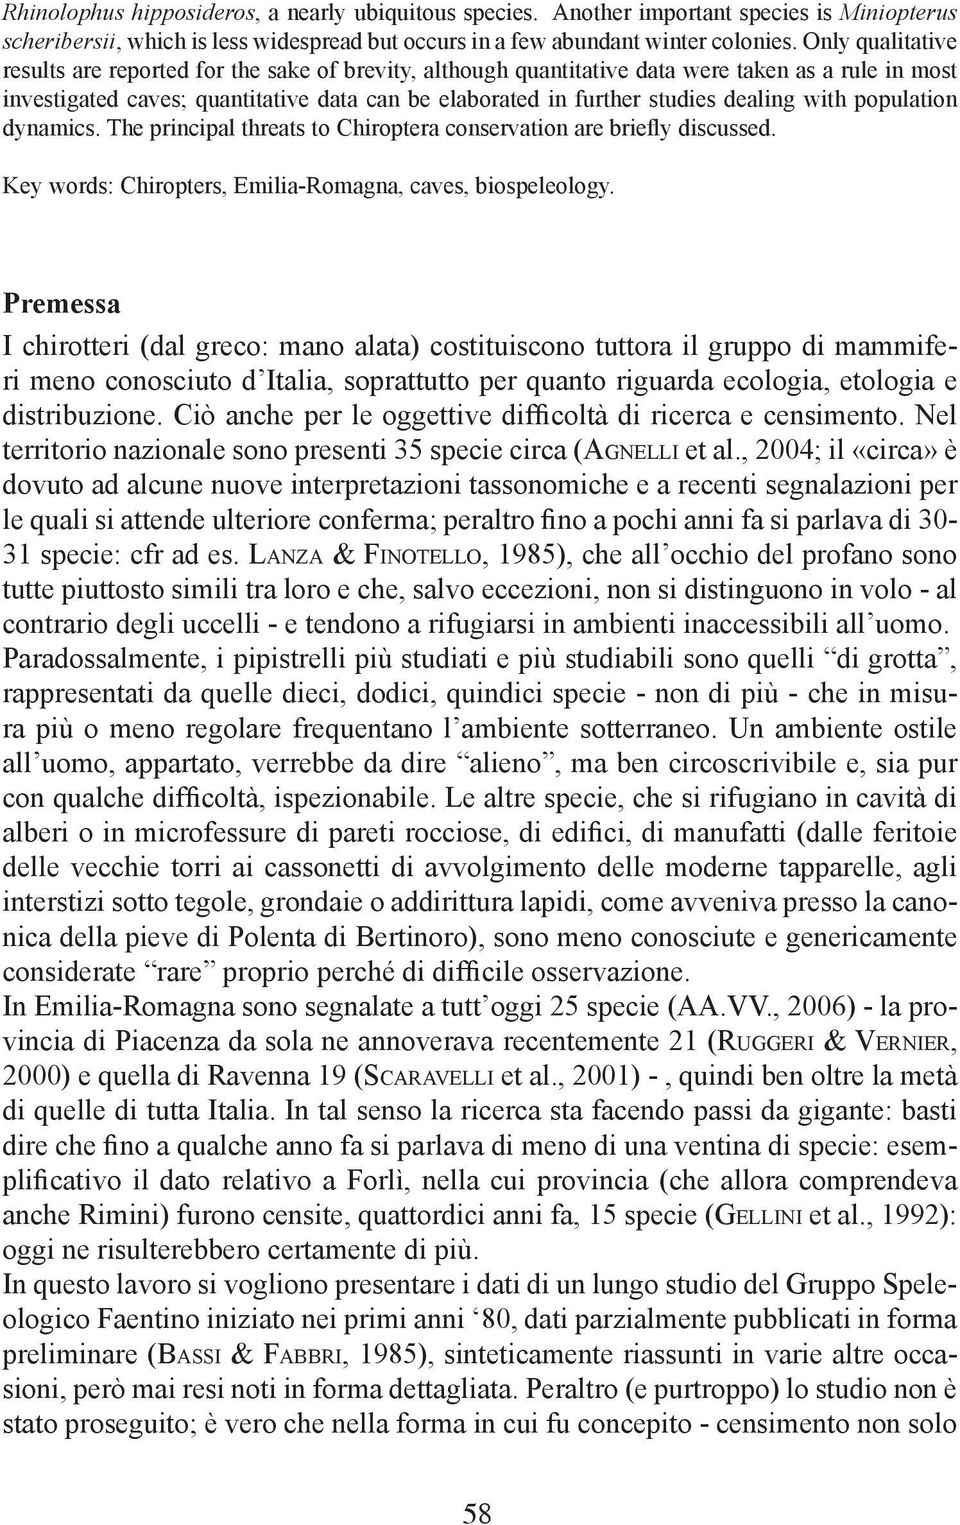 dealing with population dynamics. The principal threats to Chiroptera conservation are briefly discussed. Key words: Chiropters, Emilia-Romagna, caves, biospeleology.